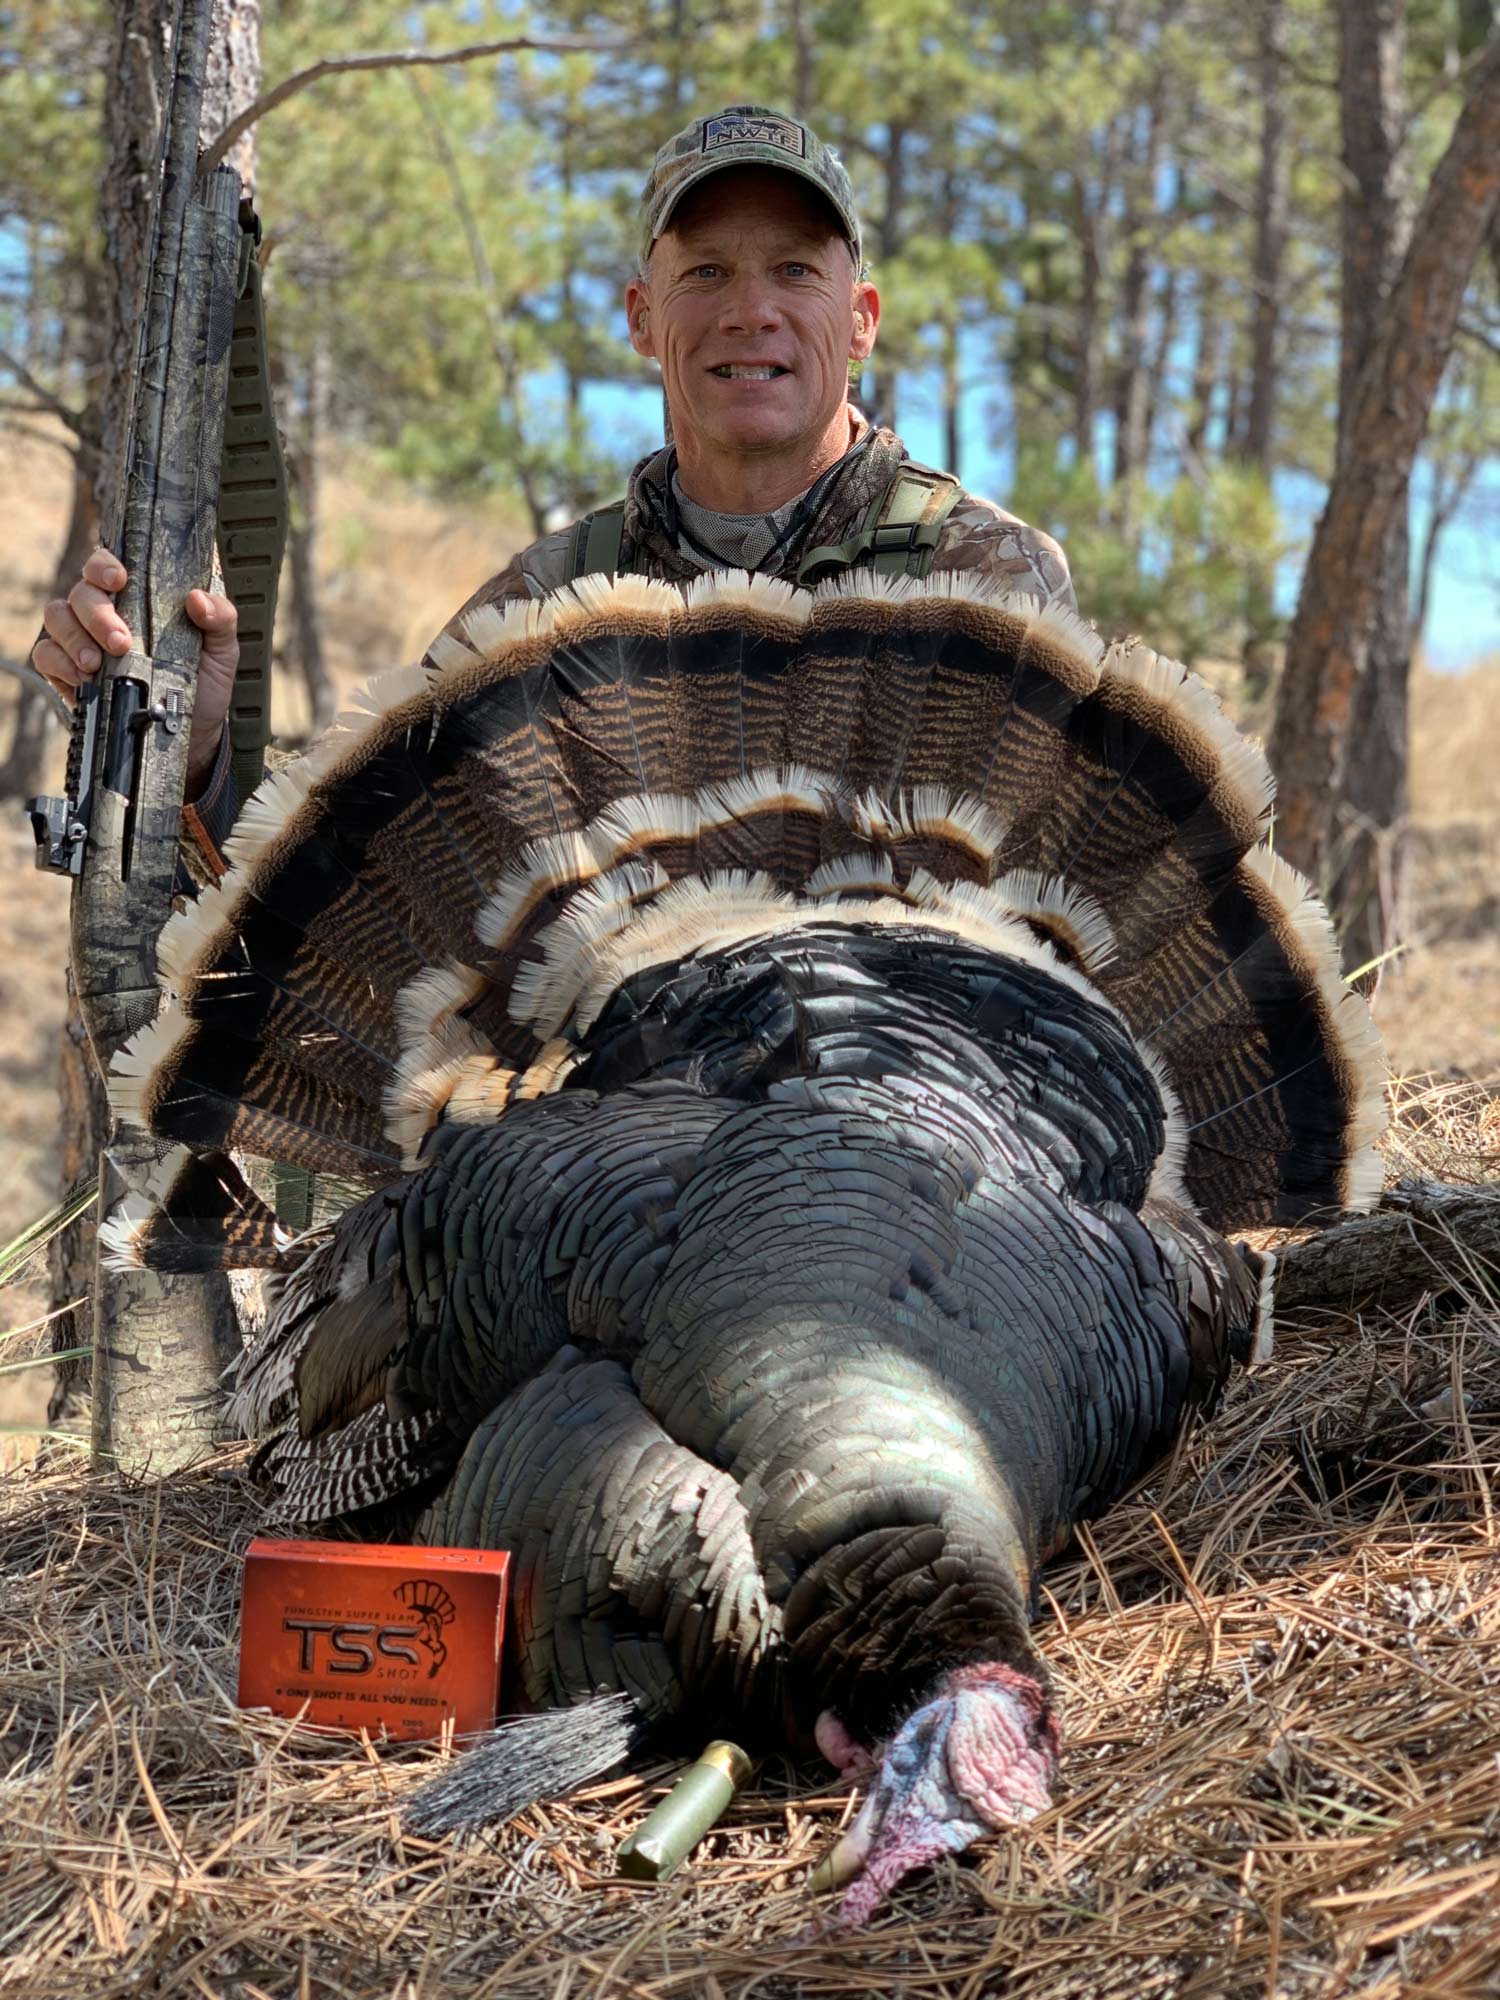 A hunter poses next to a turkey.